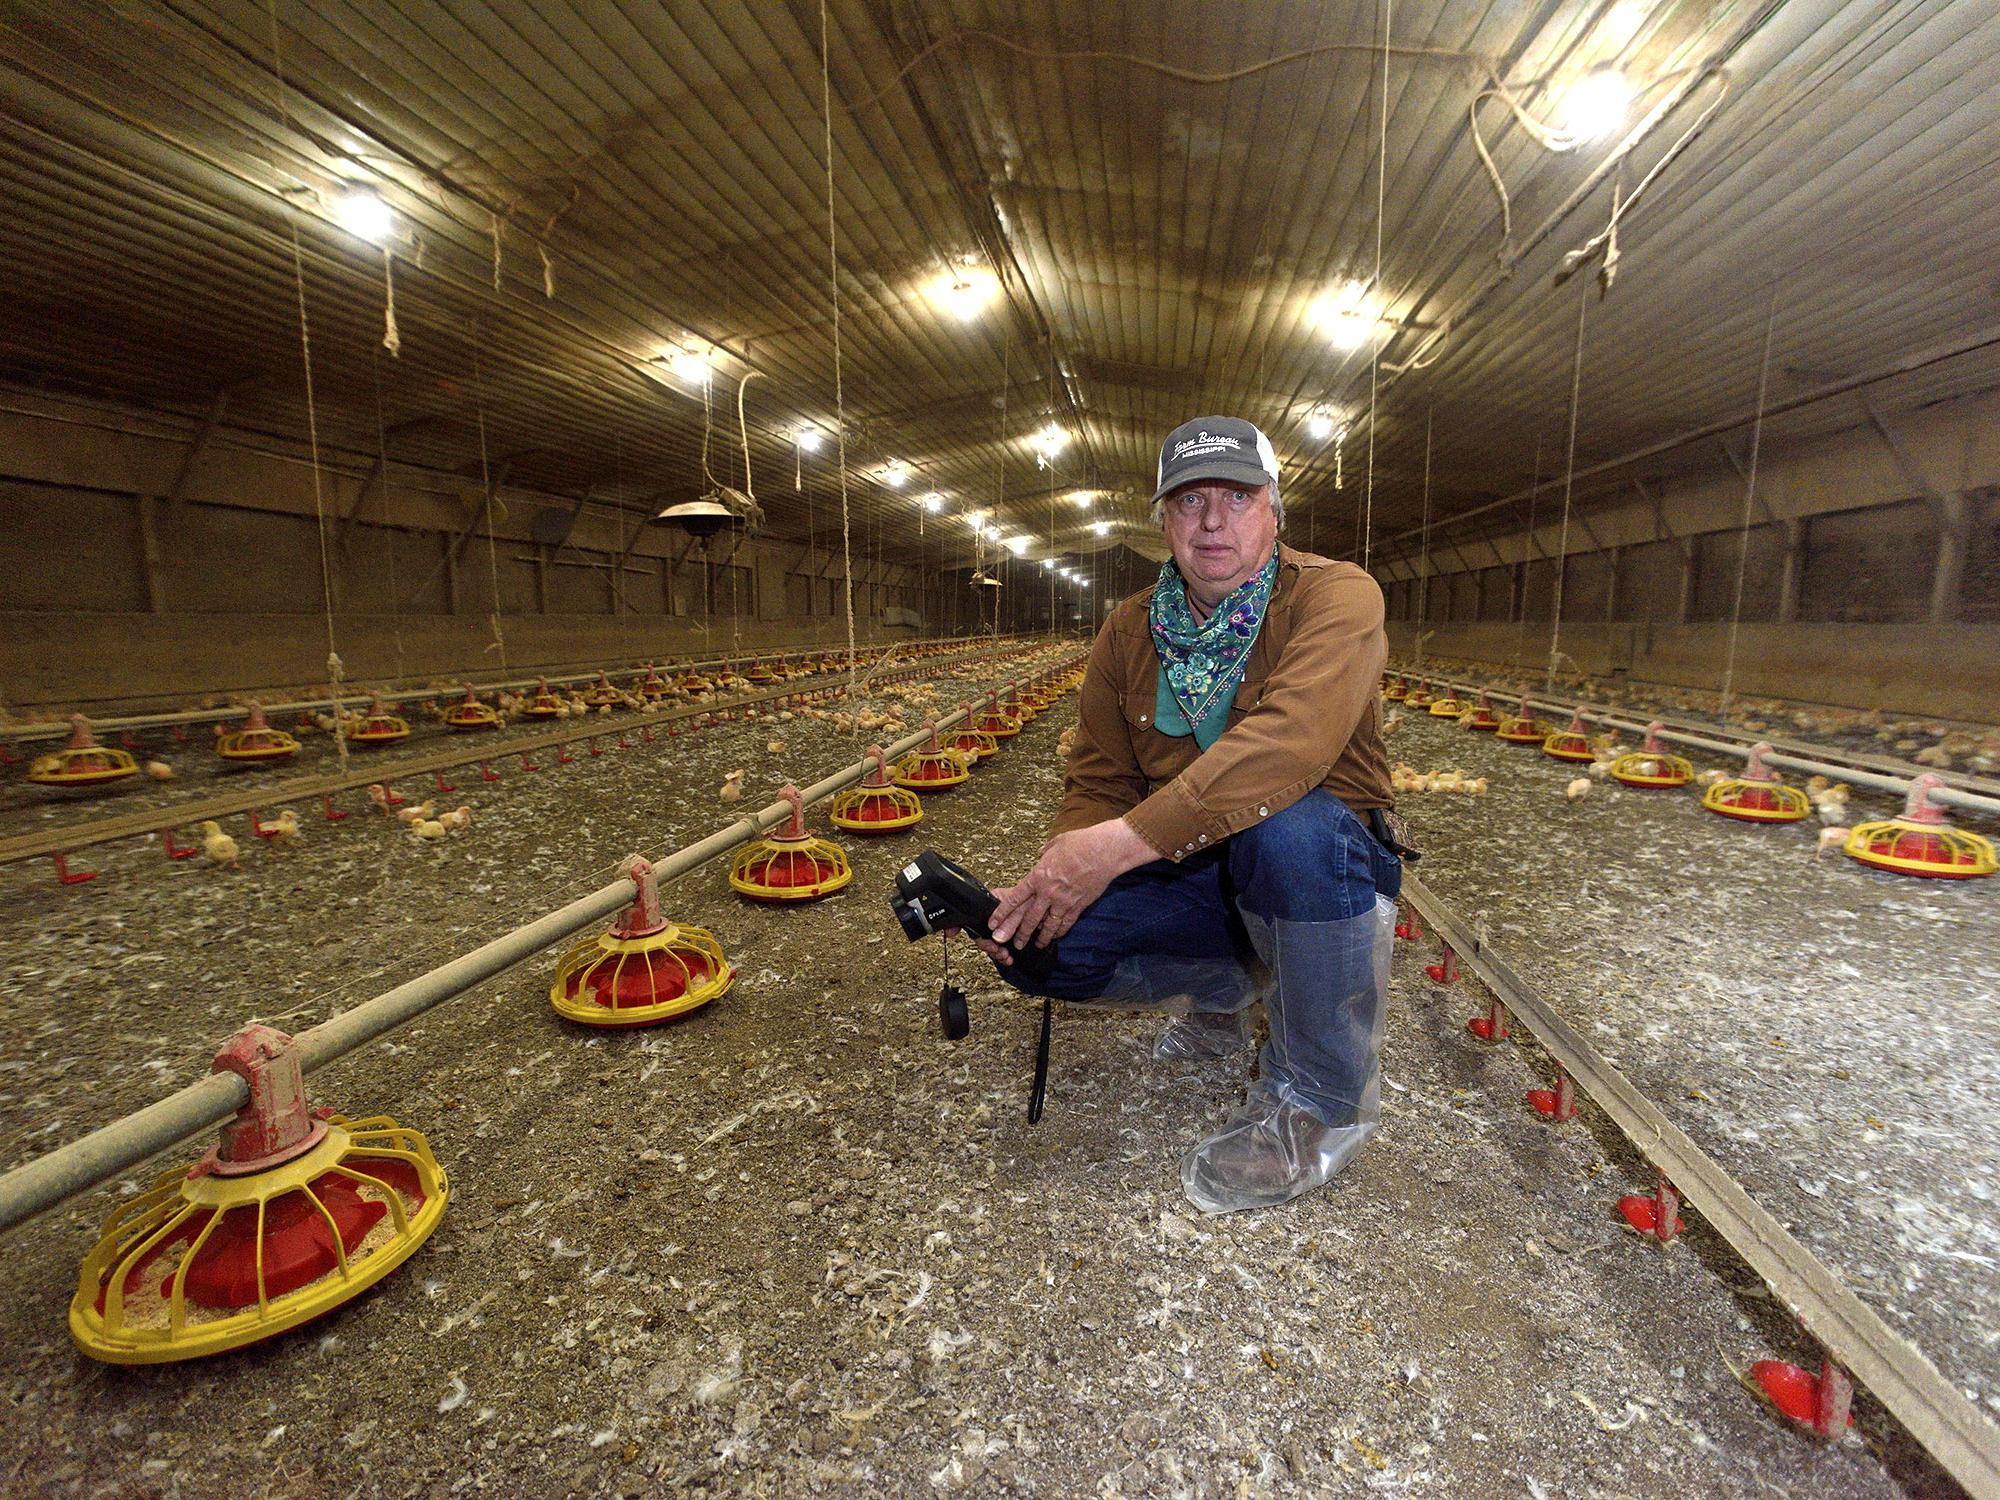 A man wearing a baseball caps squats down inside a poultry house, holding a black camera. Feeders line the floor in rows, small, yellow chicks feed nearby, and the house stretches behind him in the distance.